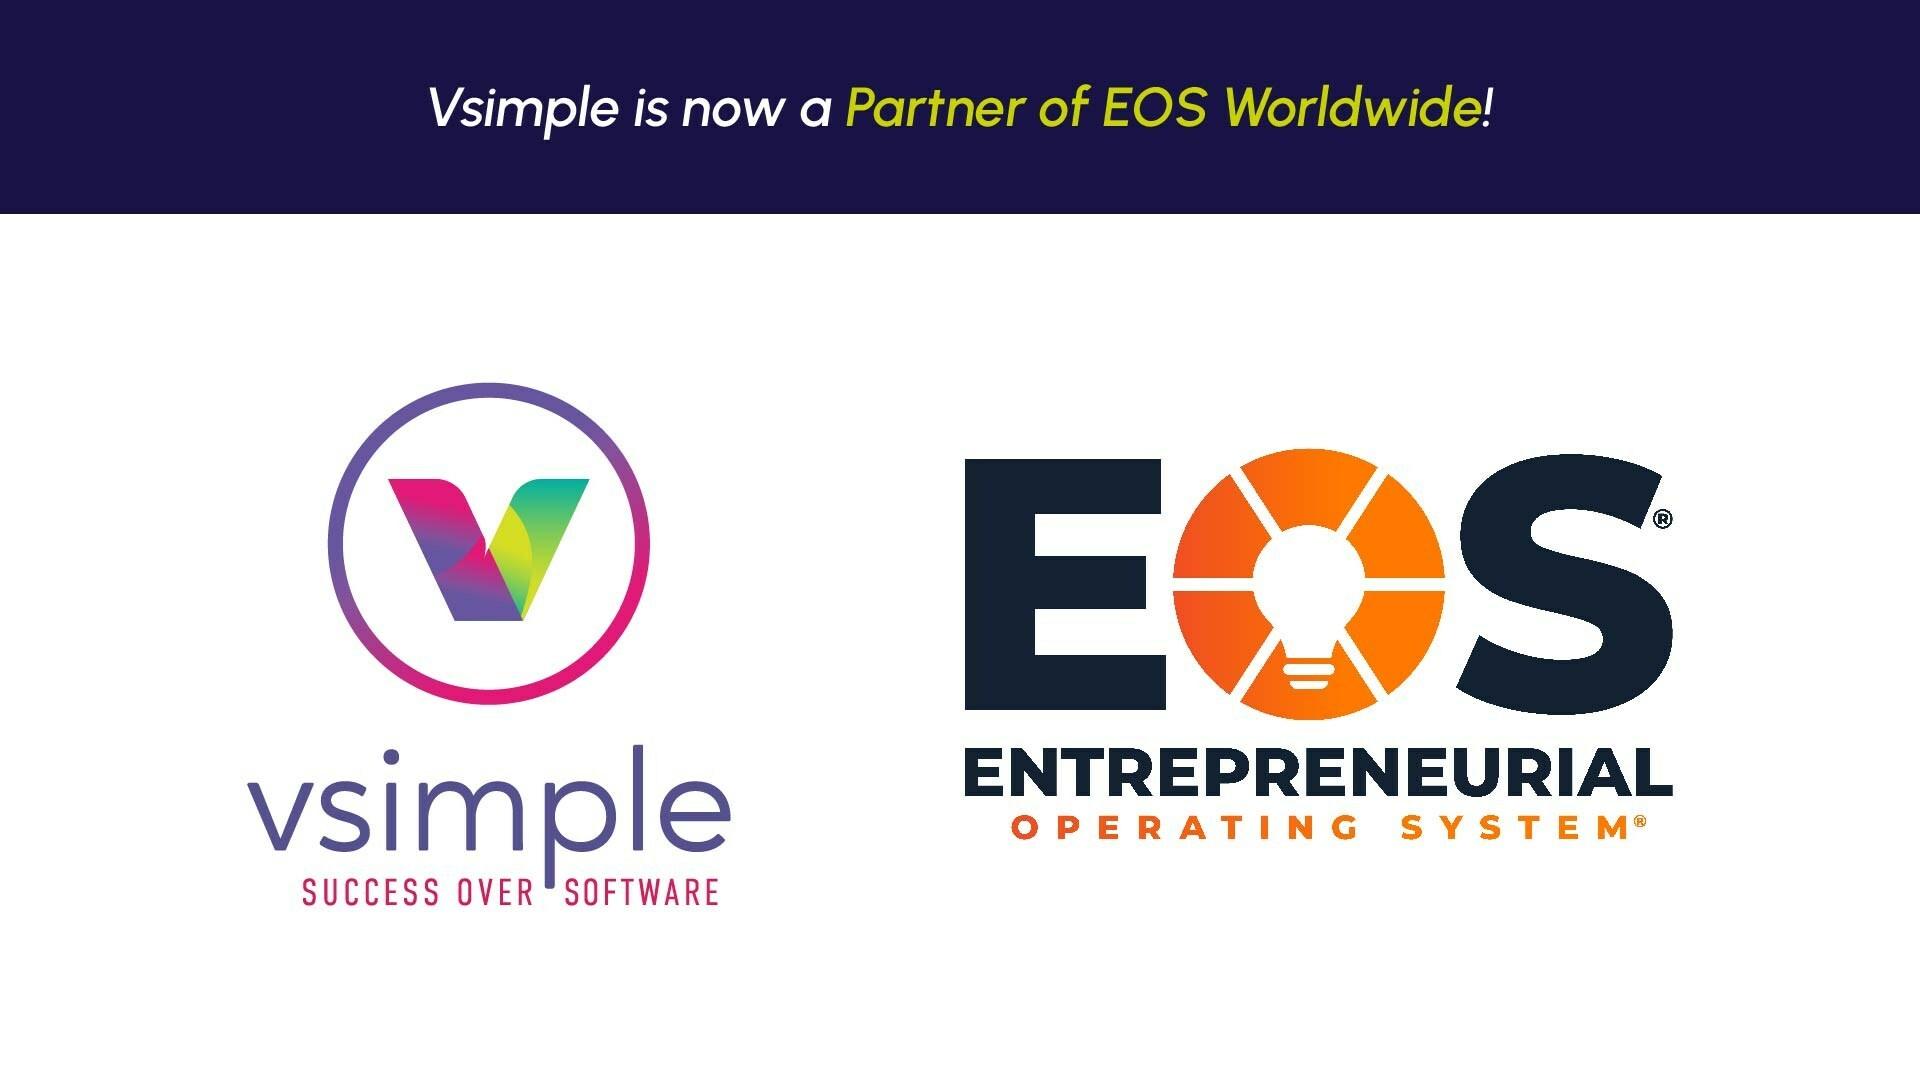 Vsimple Proudly Announces Partnership with EOS Worldwide